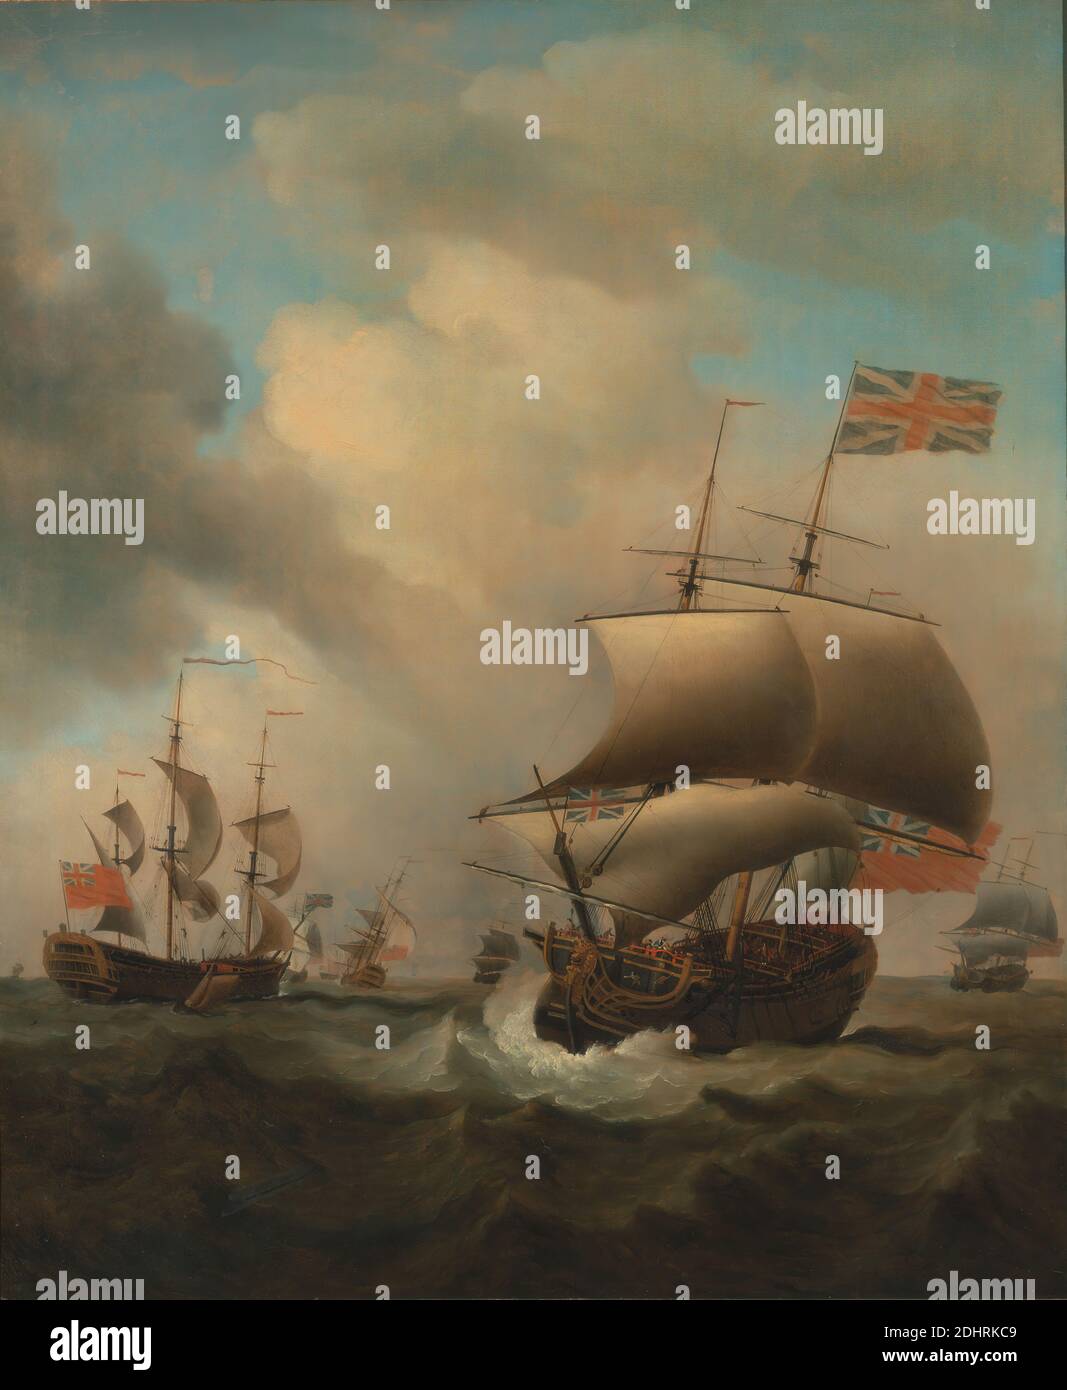 Shipping in a Choppy Sea, Samuel Scott, 1701/2–1772, British, 1753, Oil on canvas, Support (PTG): 55 x 45 1/2 inches (139.7 x 115.6 cm), clouds, fleet, full-rigged ships, marine art, sea, ships, sloop (sailing vessel), water, waves (natural events), wind Stock Photo